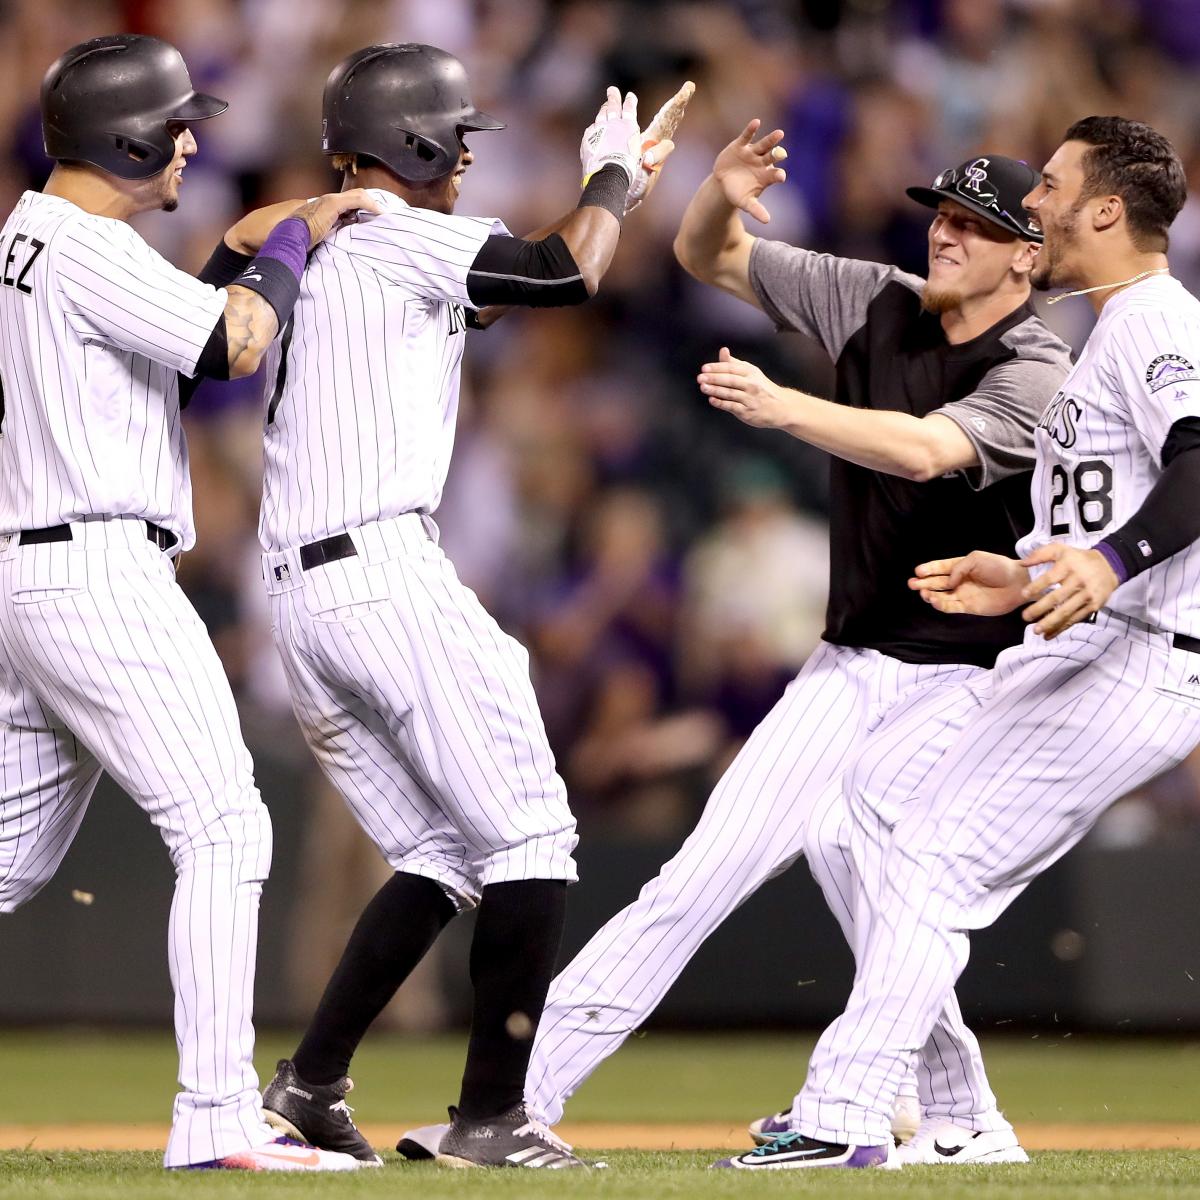 Colorado Rockies on X: Yes, on Father's Day 2017, Nolan Arenado hit an  epic walk-off home run to complete the cycle. This is the only known photo  of the dirty, blood-stained jersey